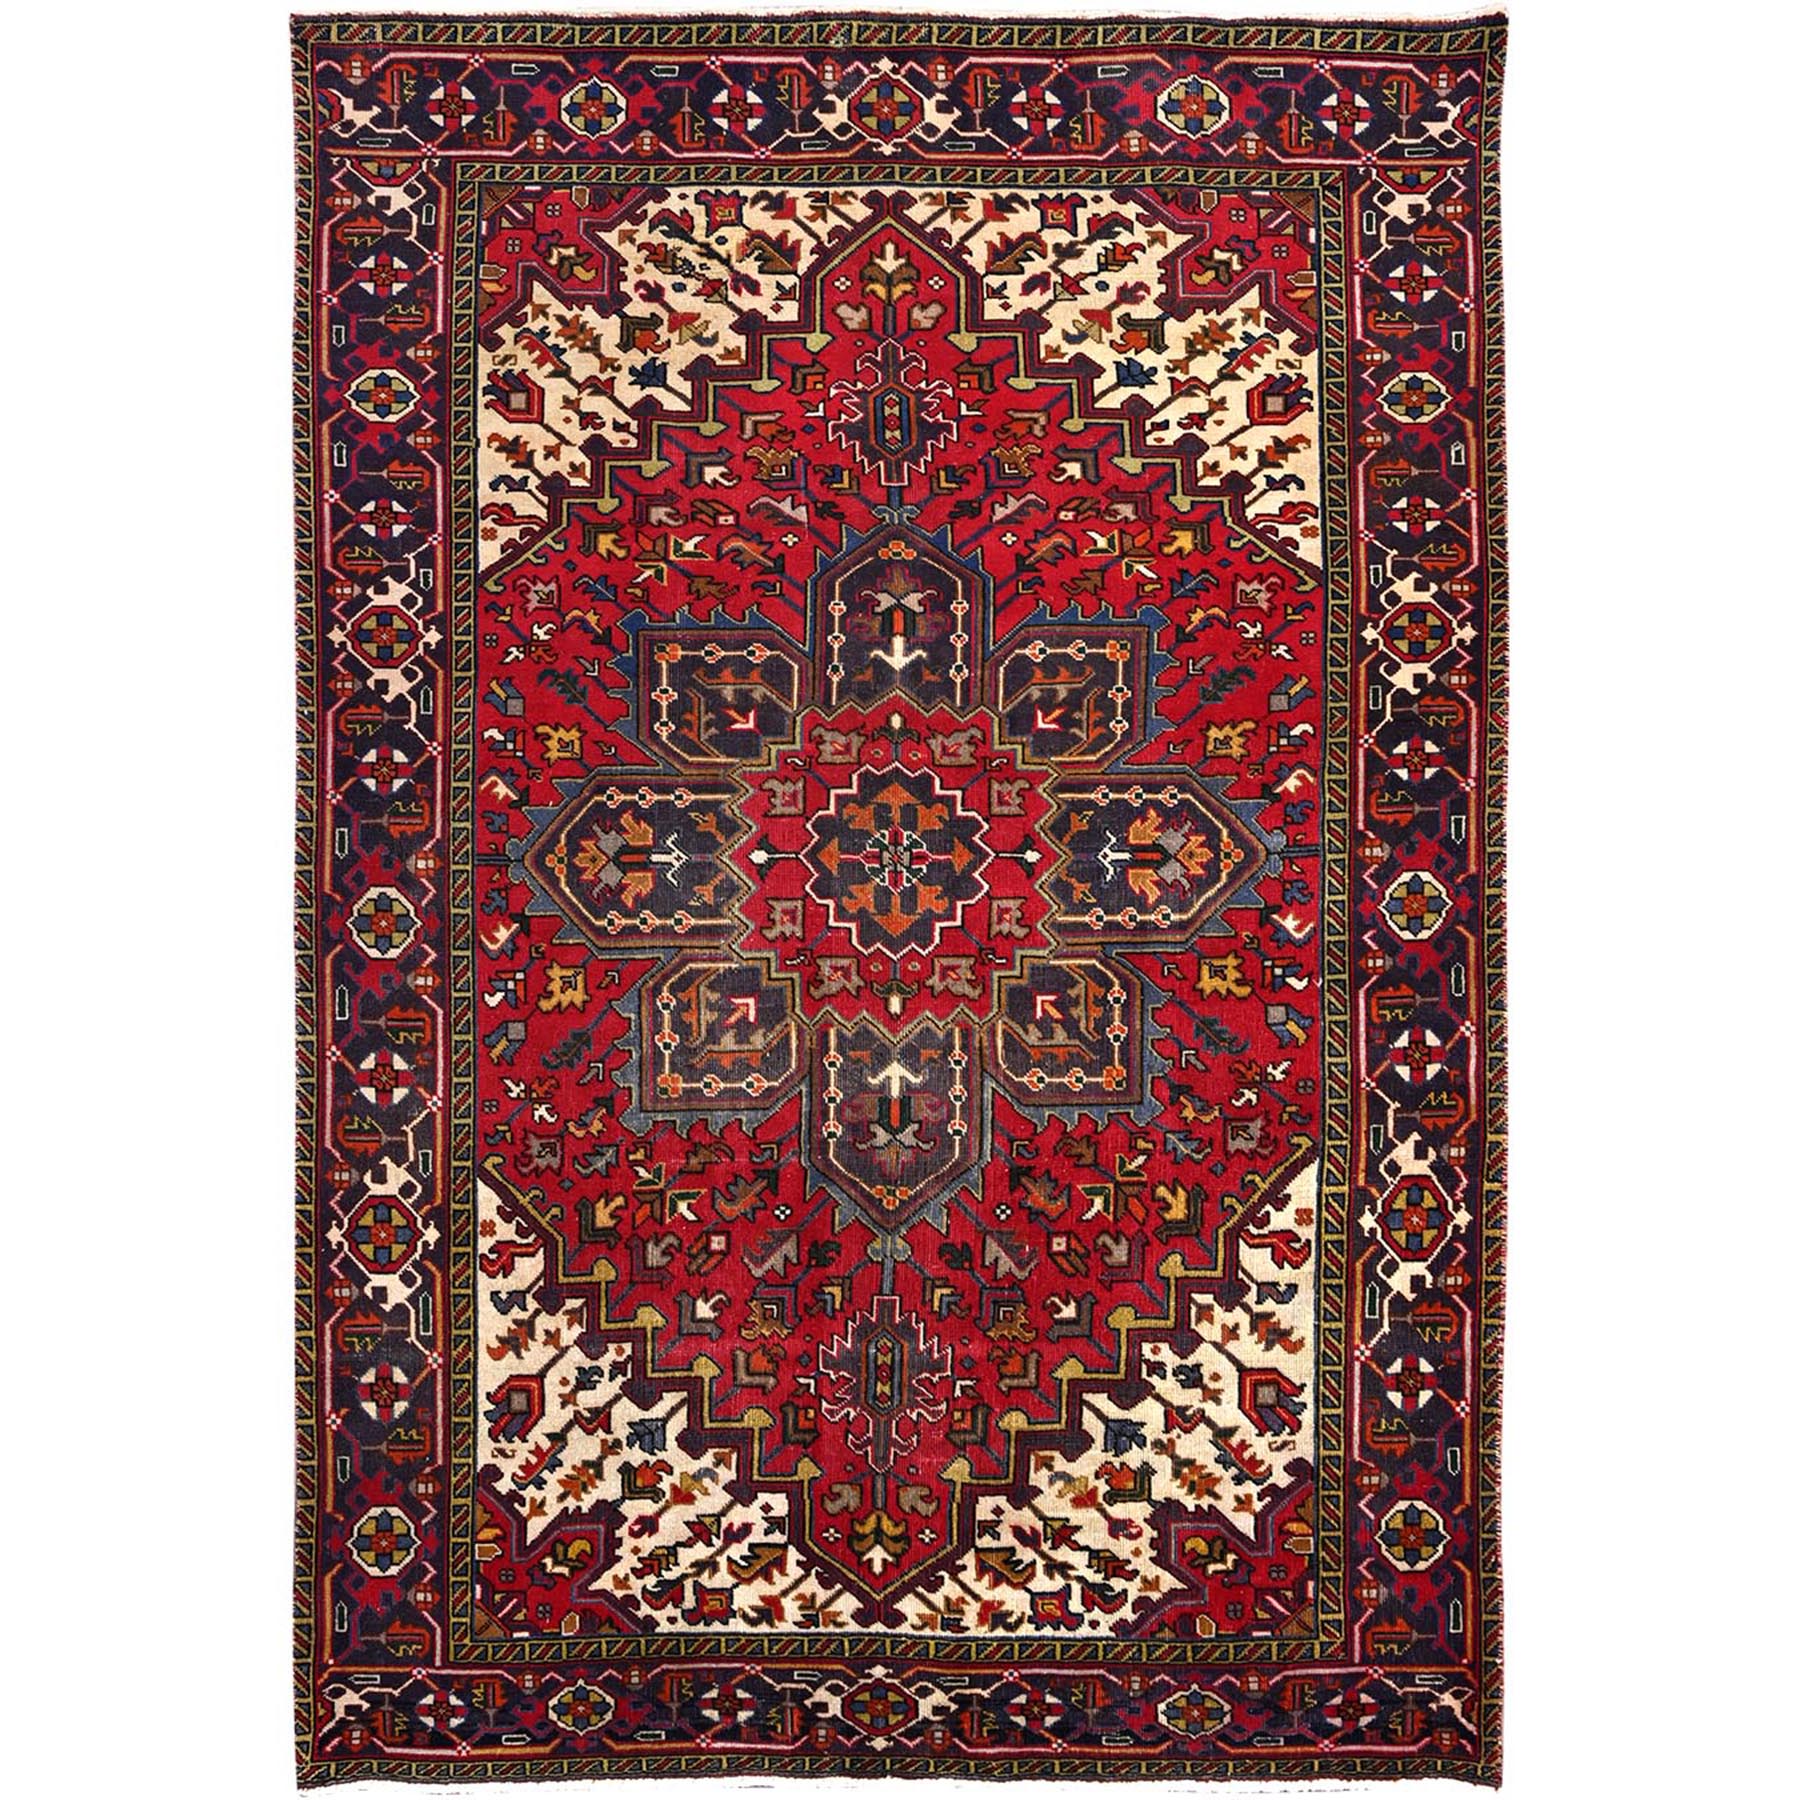  Wool Hand-Knotted Area Rug 6'4